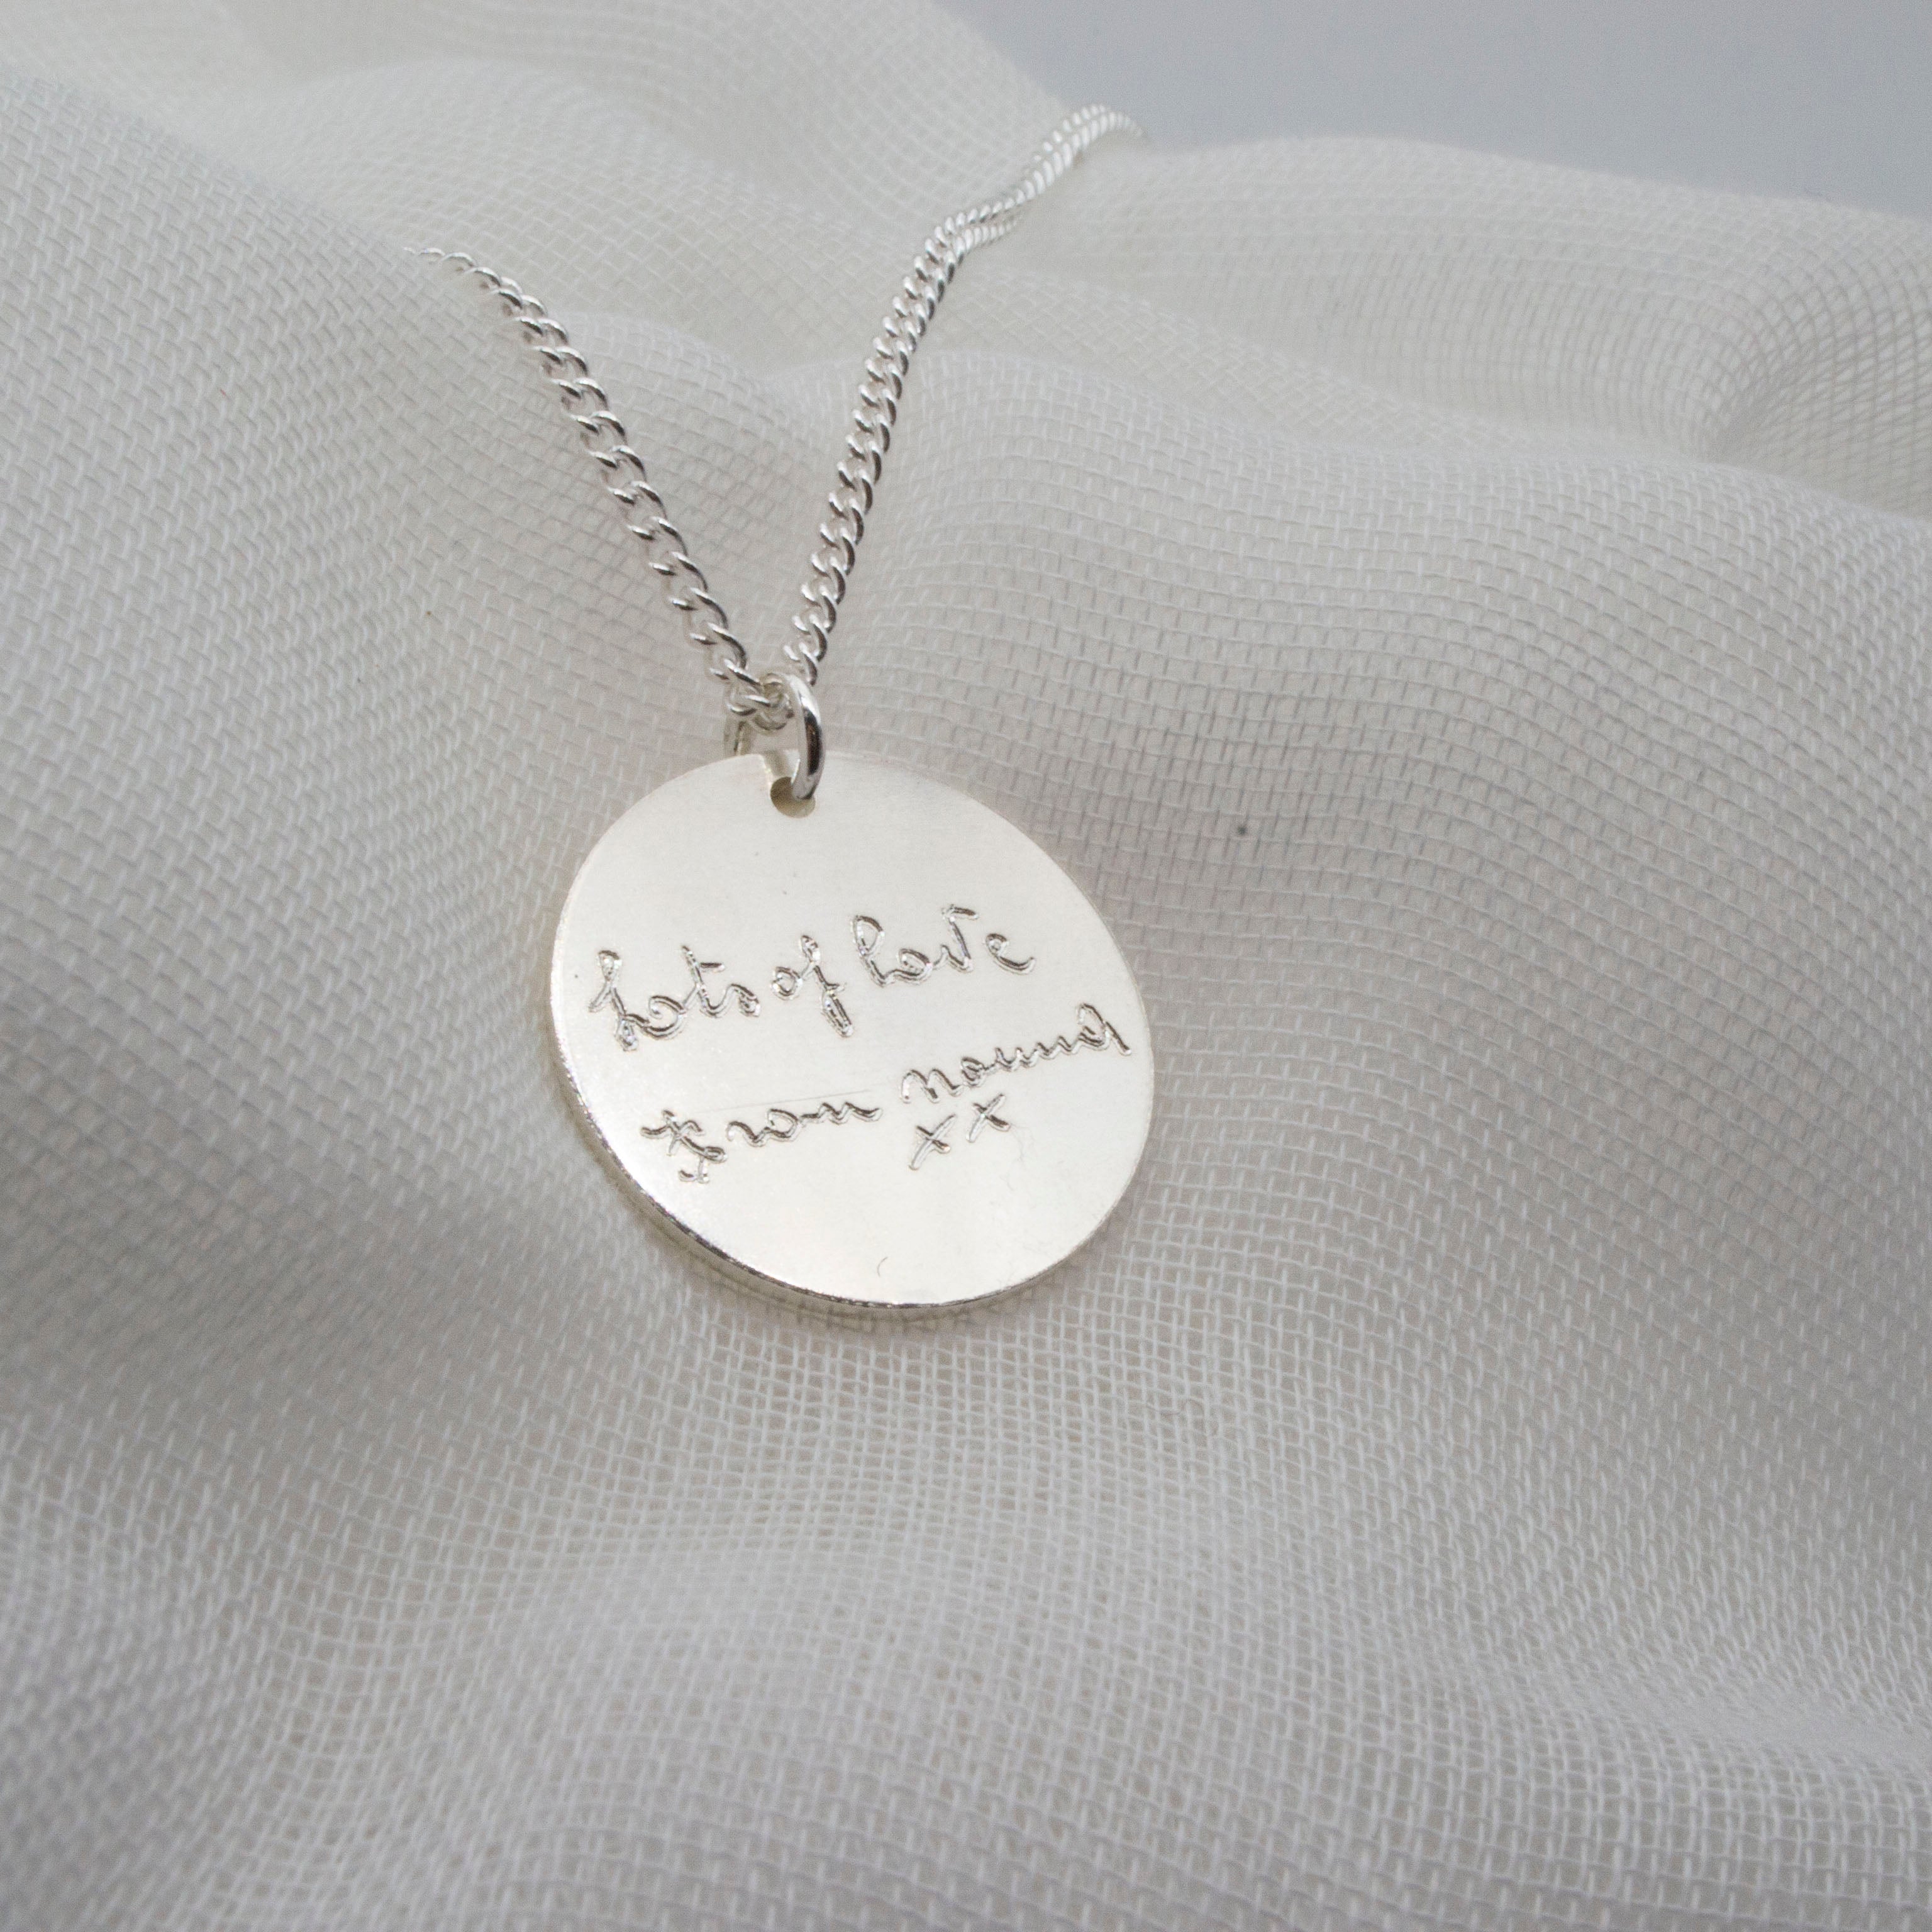 Personalized Handwriting Necklace Personalized Signature - Etsy |  Handwriting jewelry, Handwriting necklace custom, Handwriting necklace